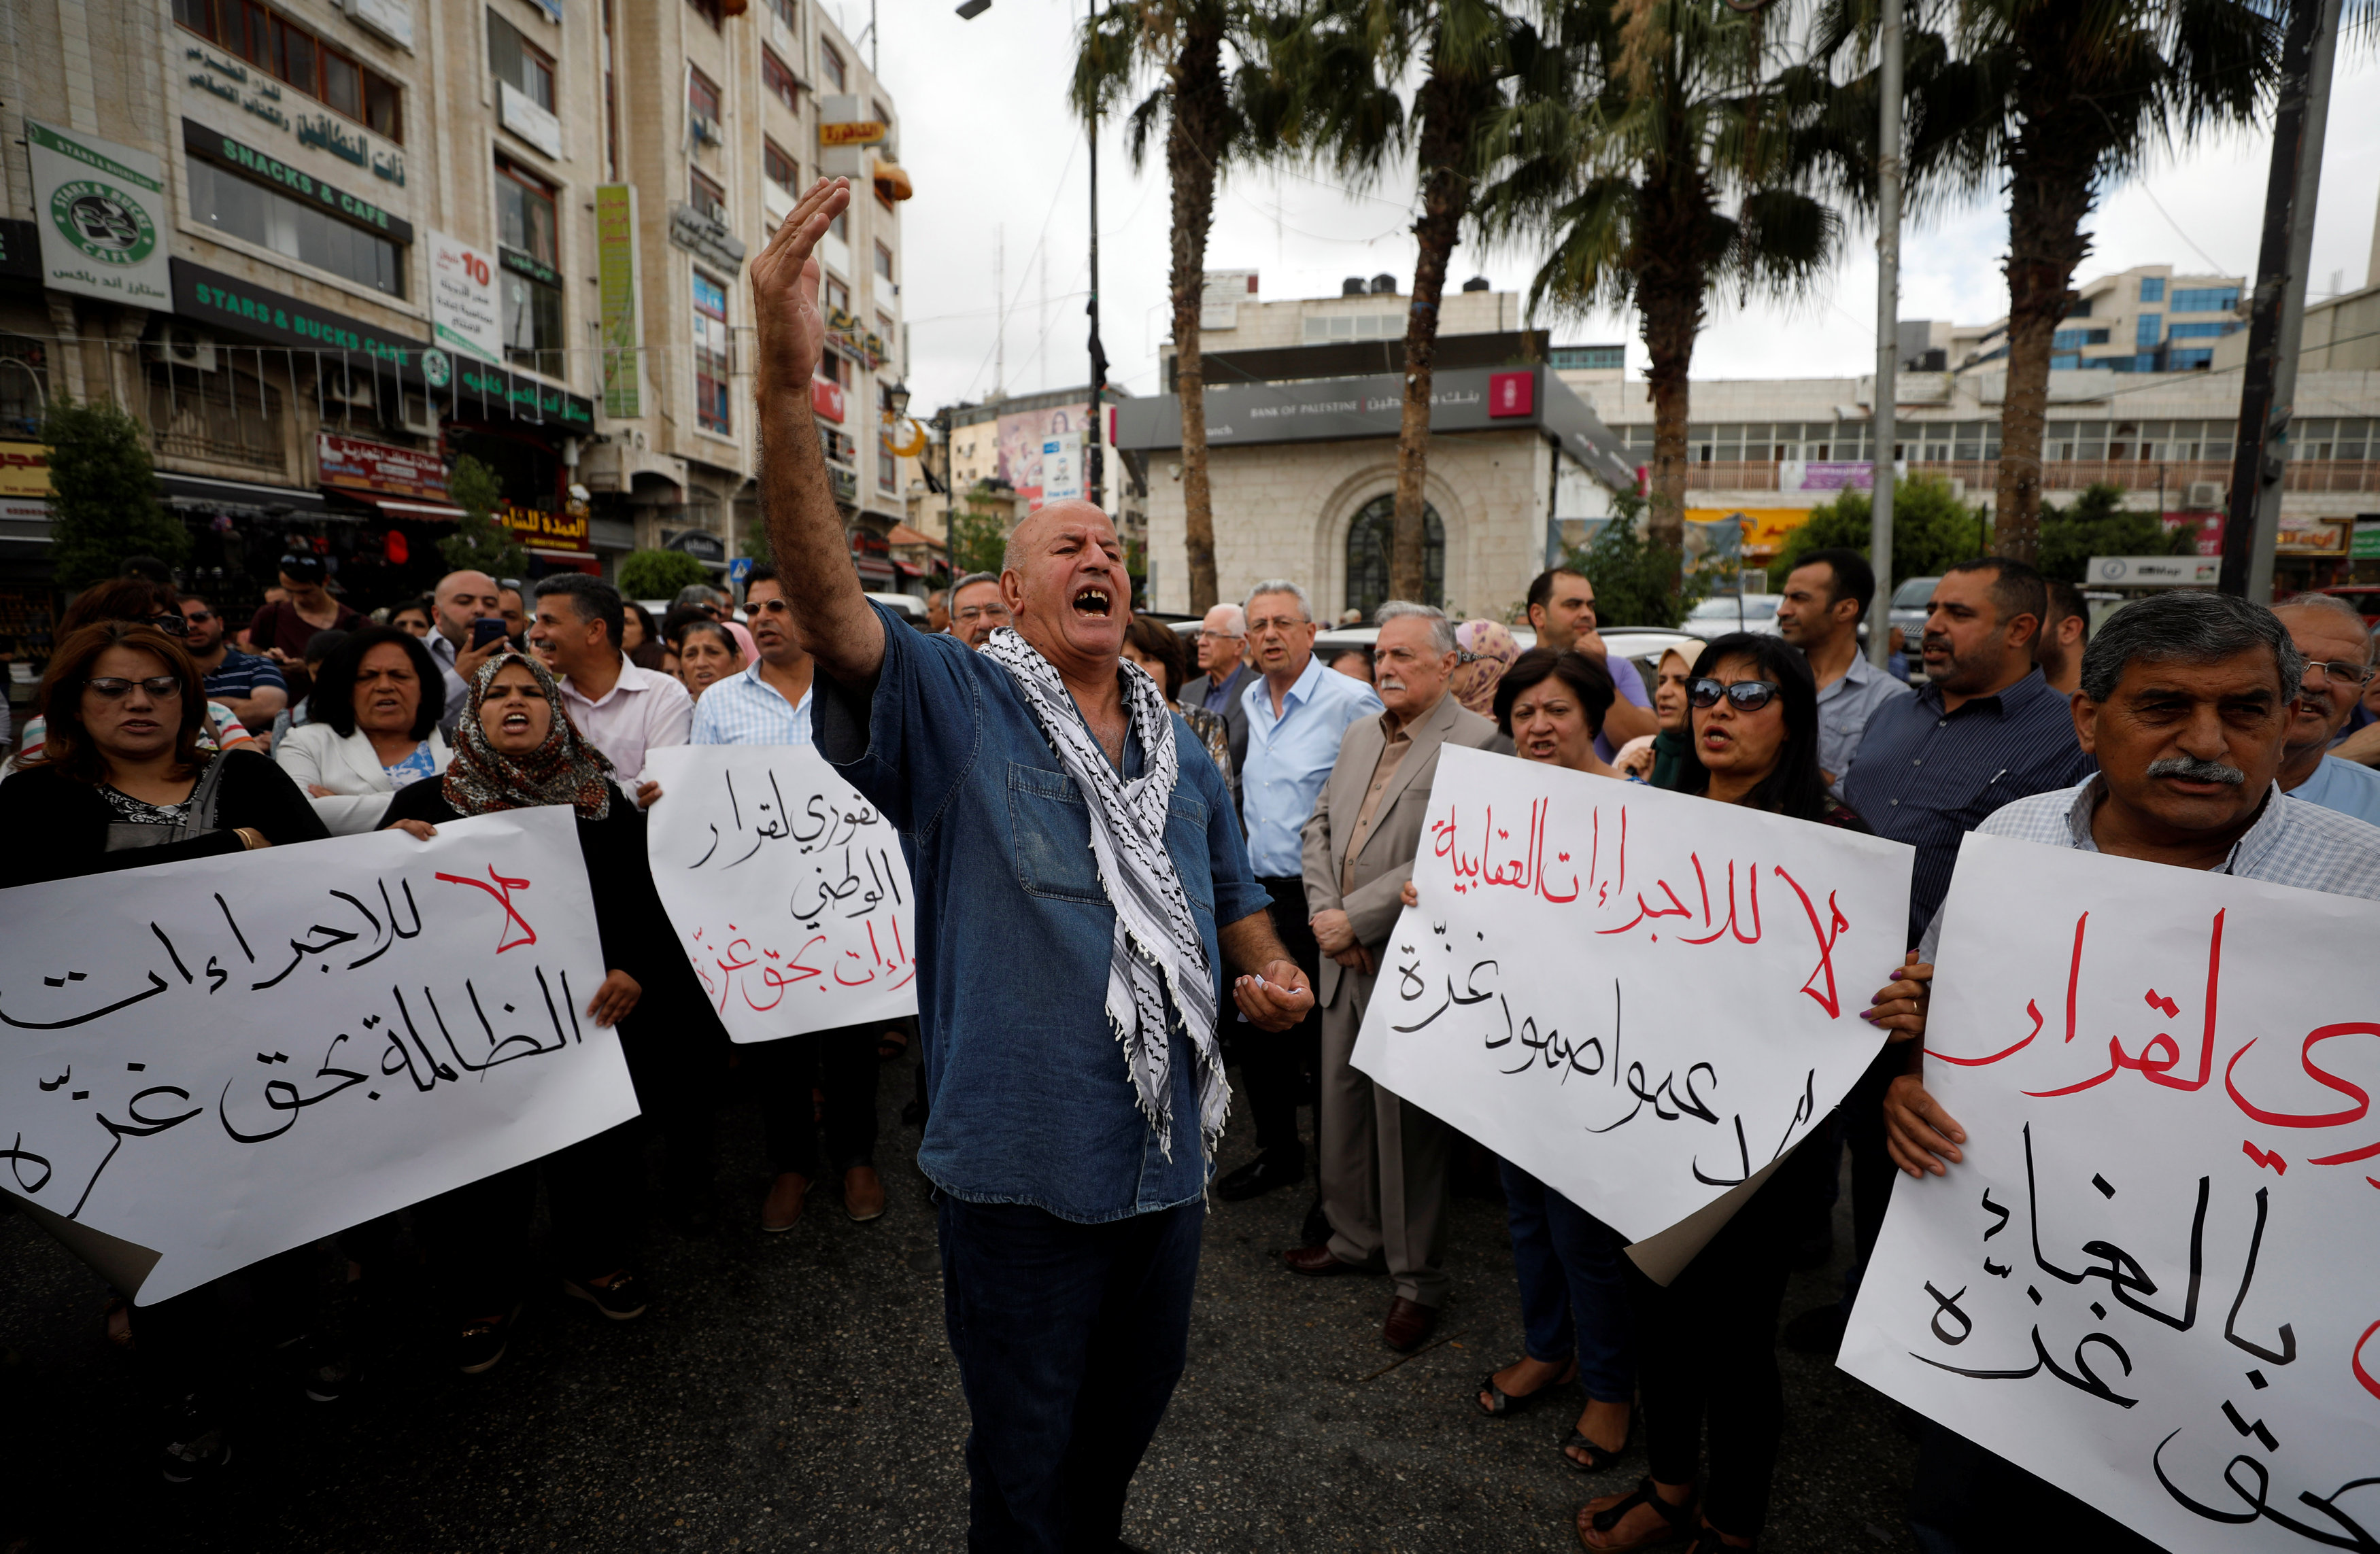 Palestinians take part in a protest demanding to lift the sanctions on Gaza Strip, in Ramallah, in the occupied West Bank